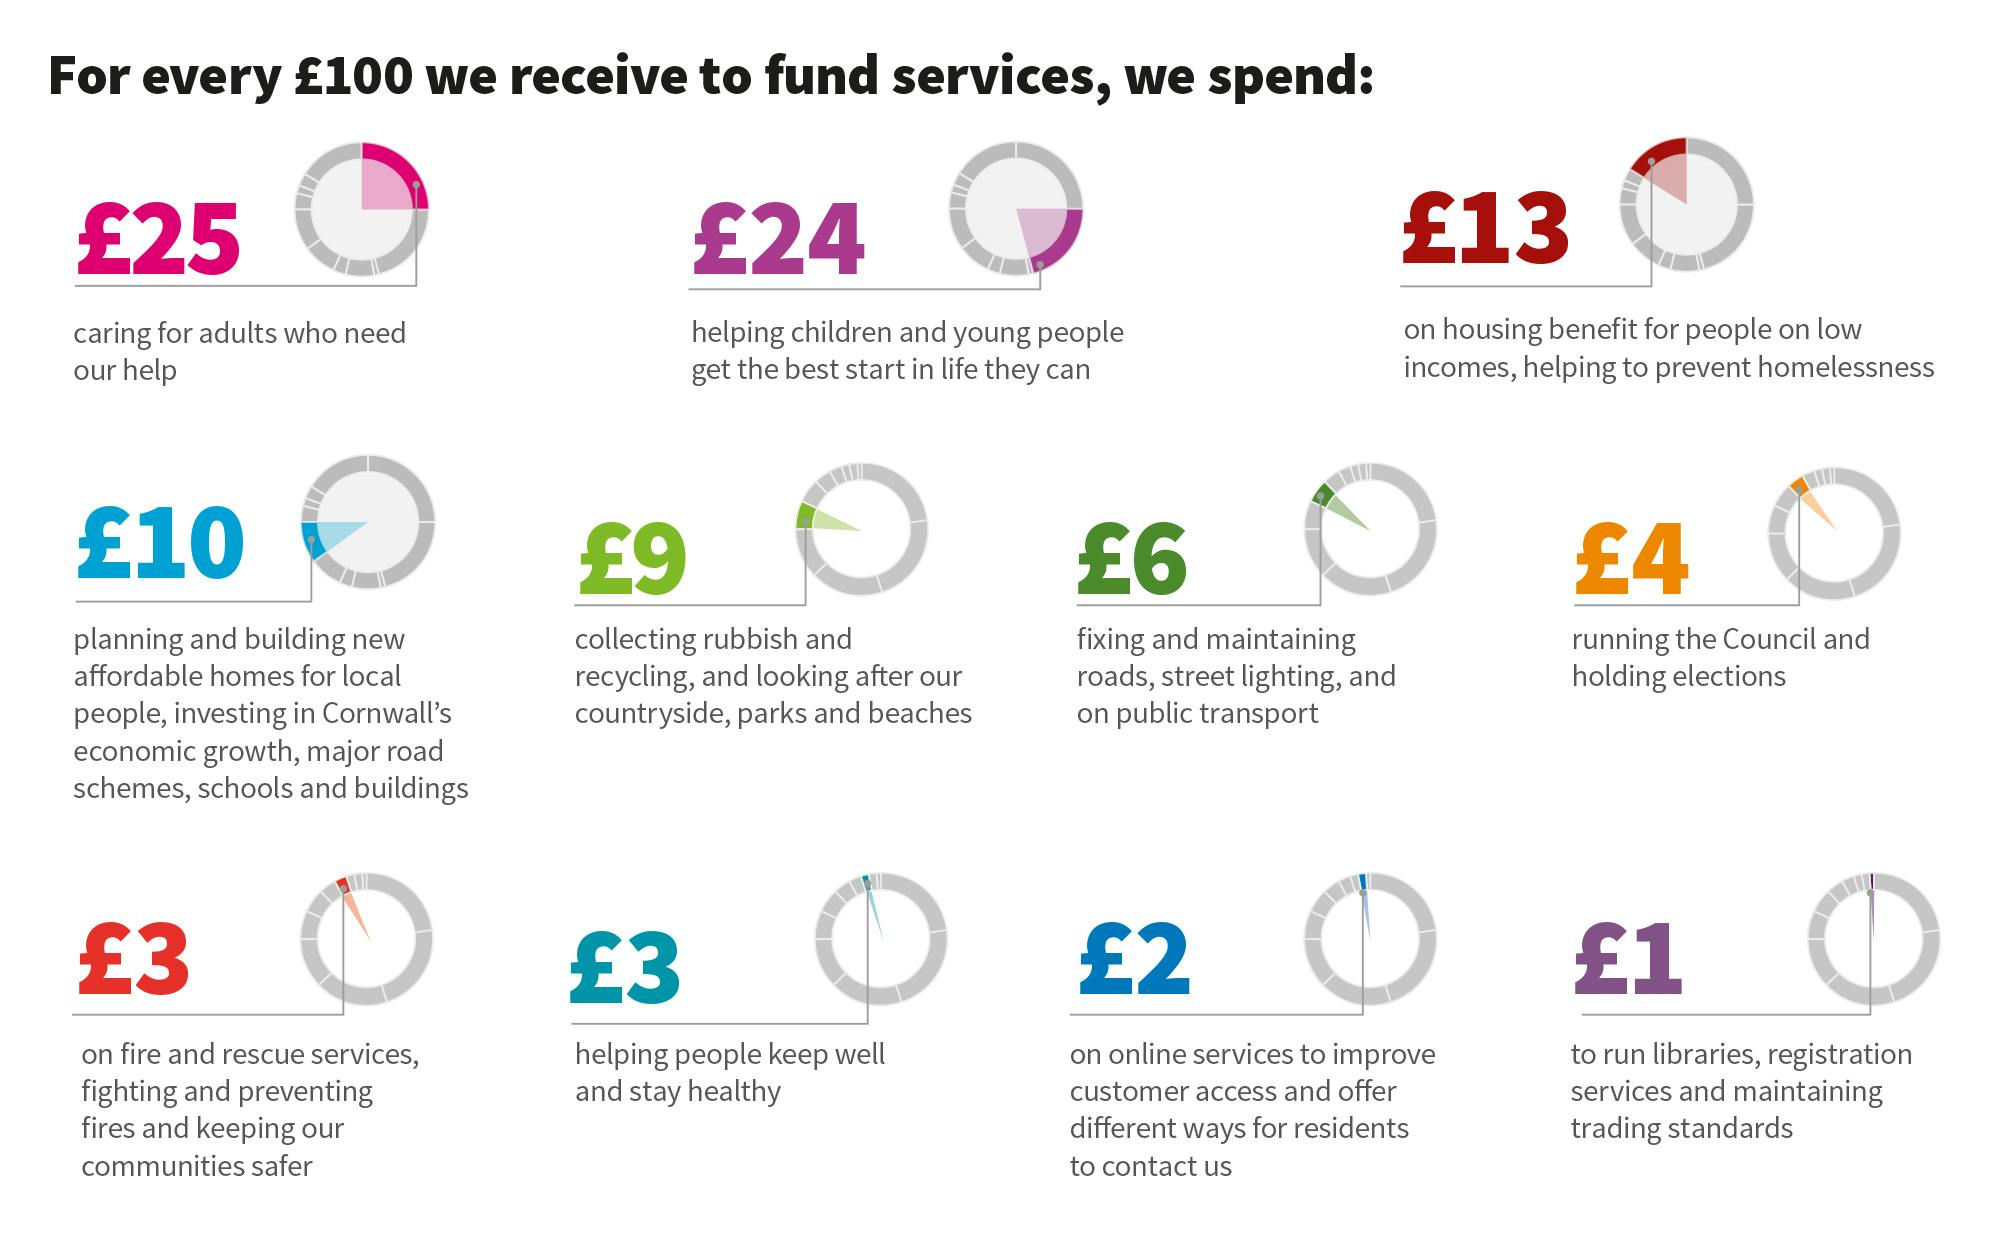 How we spend our budget - click to enlarge